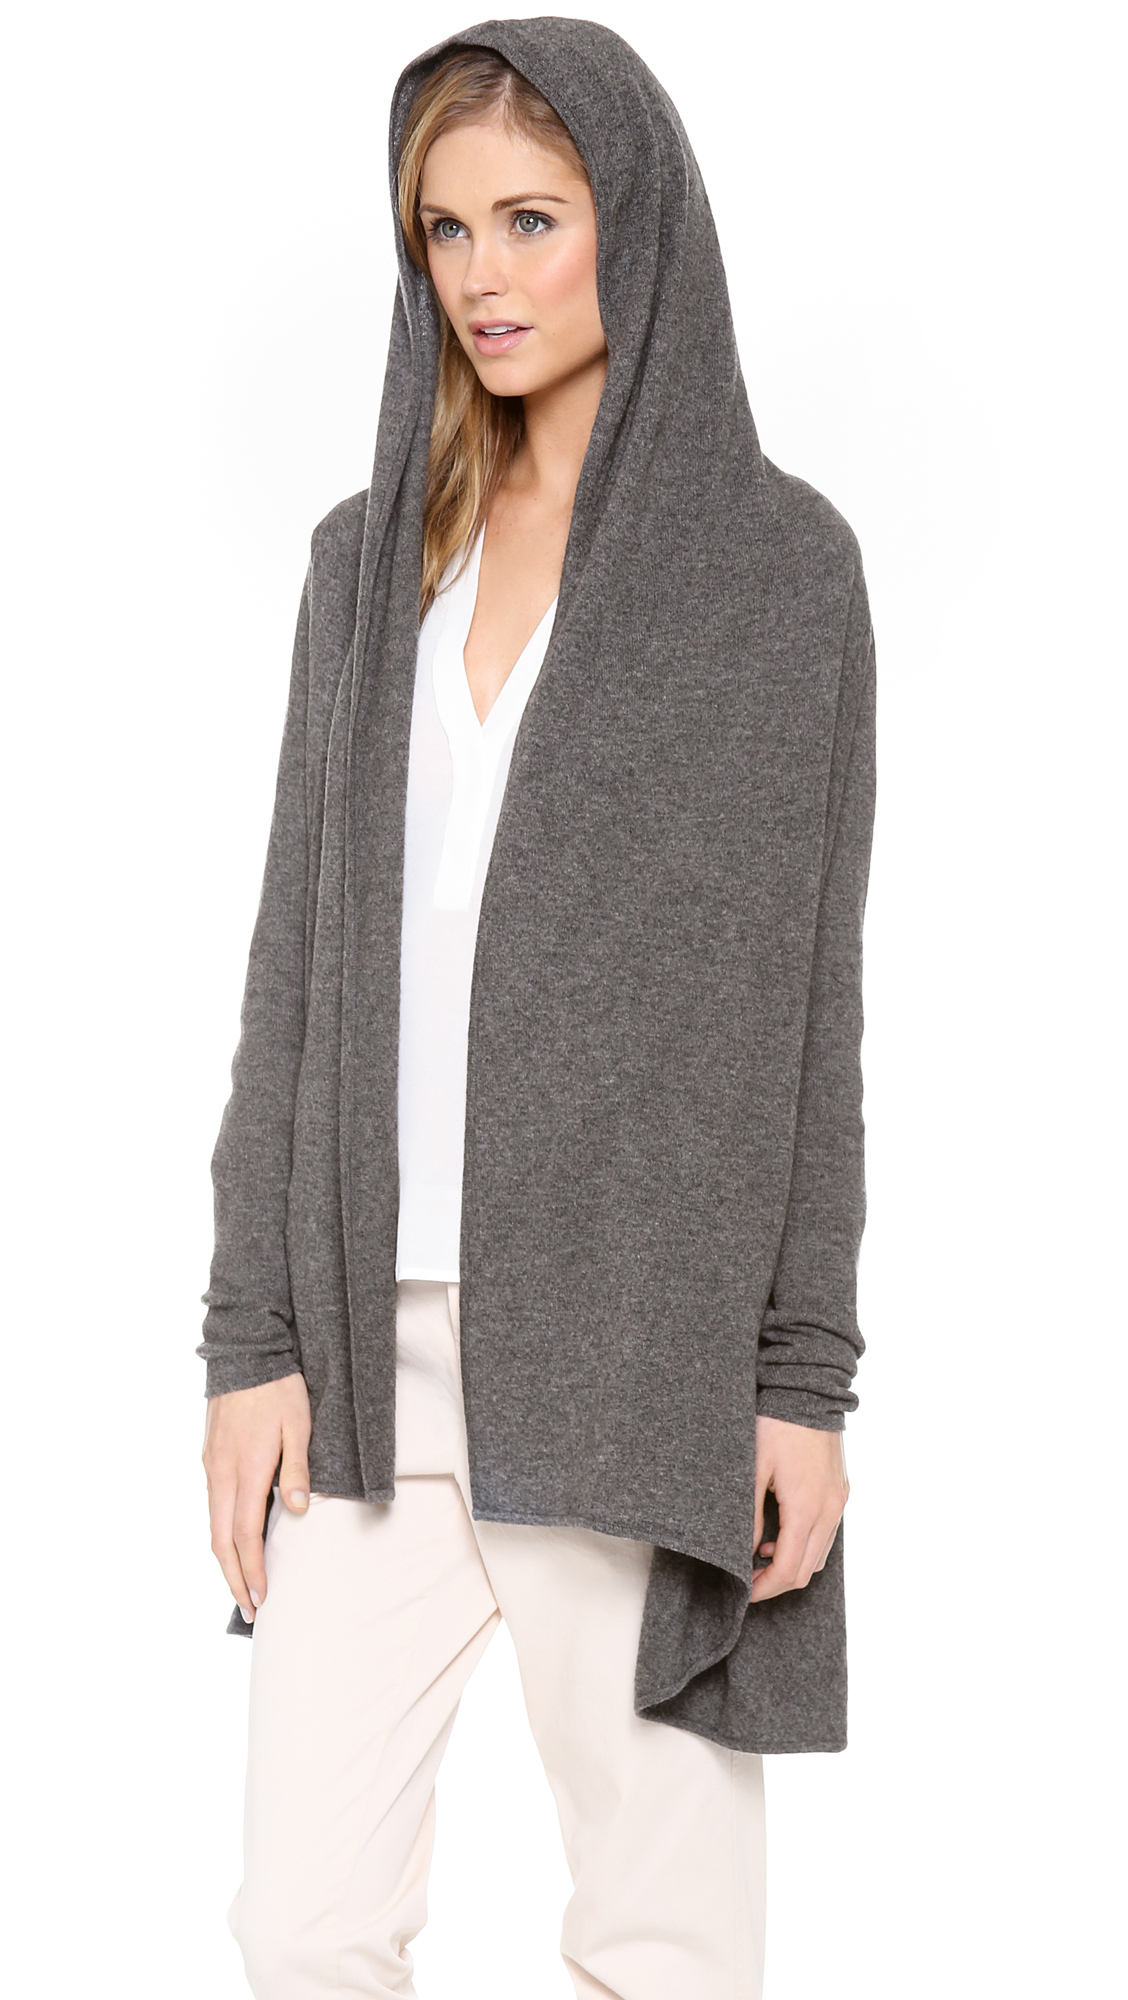 Lyst - Vince Hooded Cashmere Cardigan in Gray